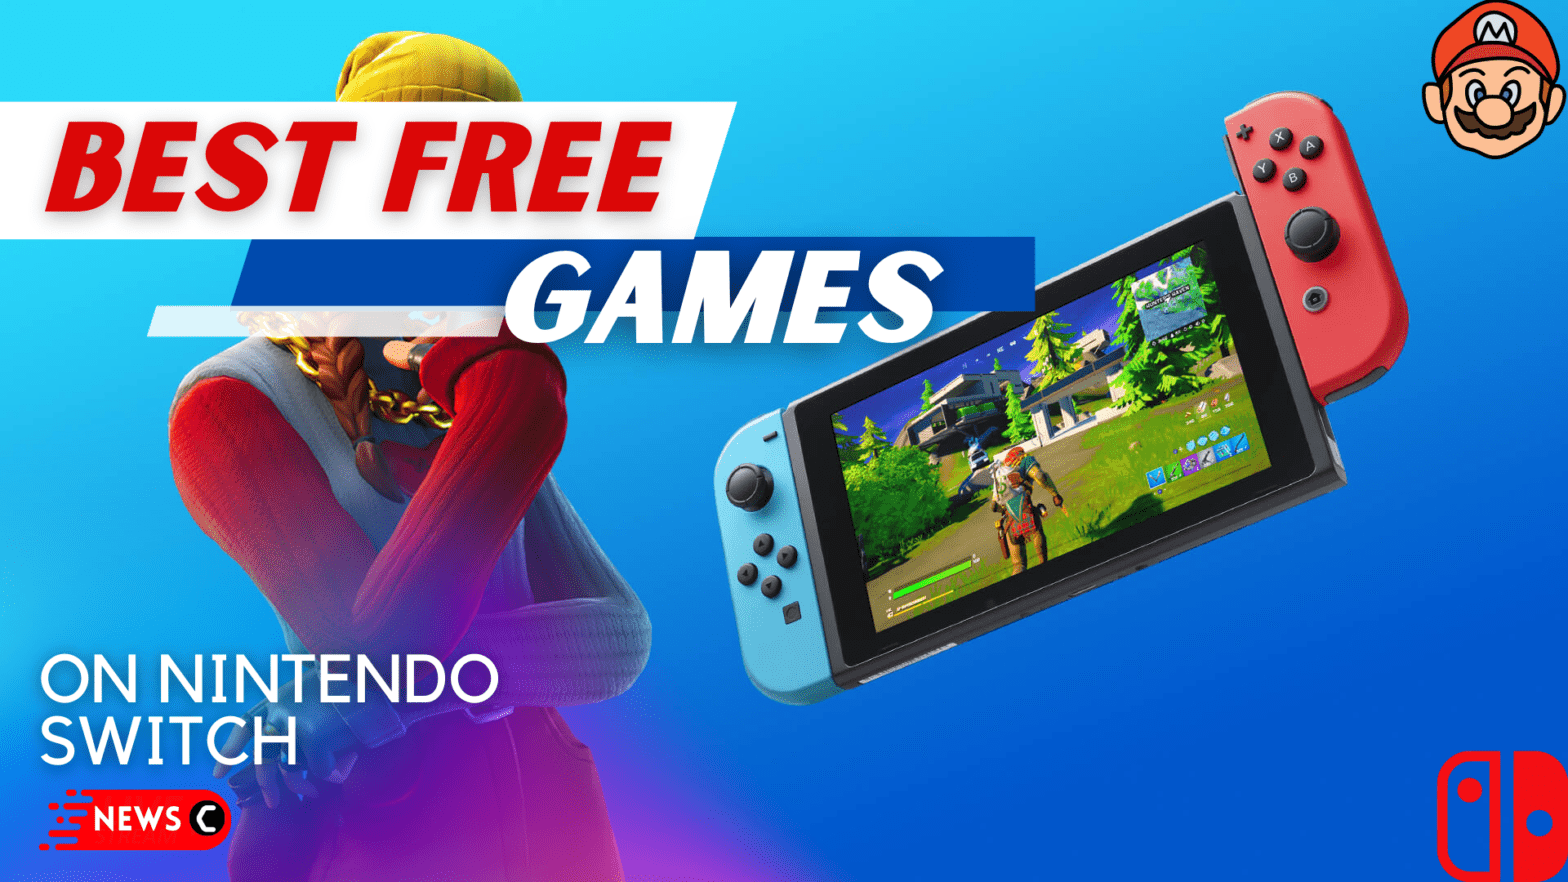 The Best Free Nintendo Switch Games